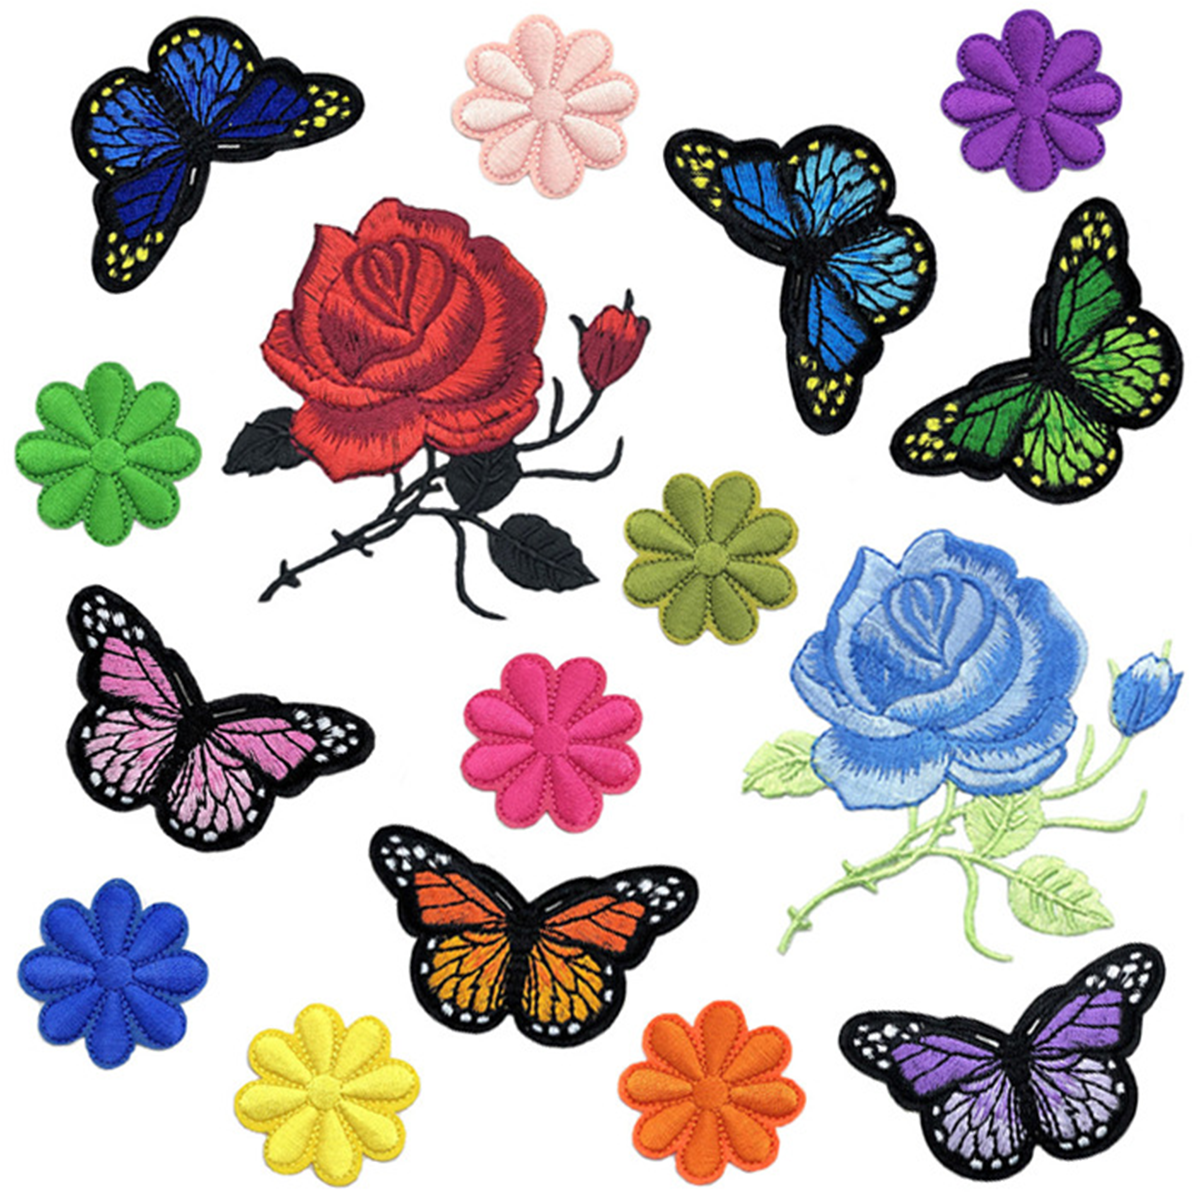  Iron on Patches,16 Pieces Embroidered Applique Patches